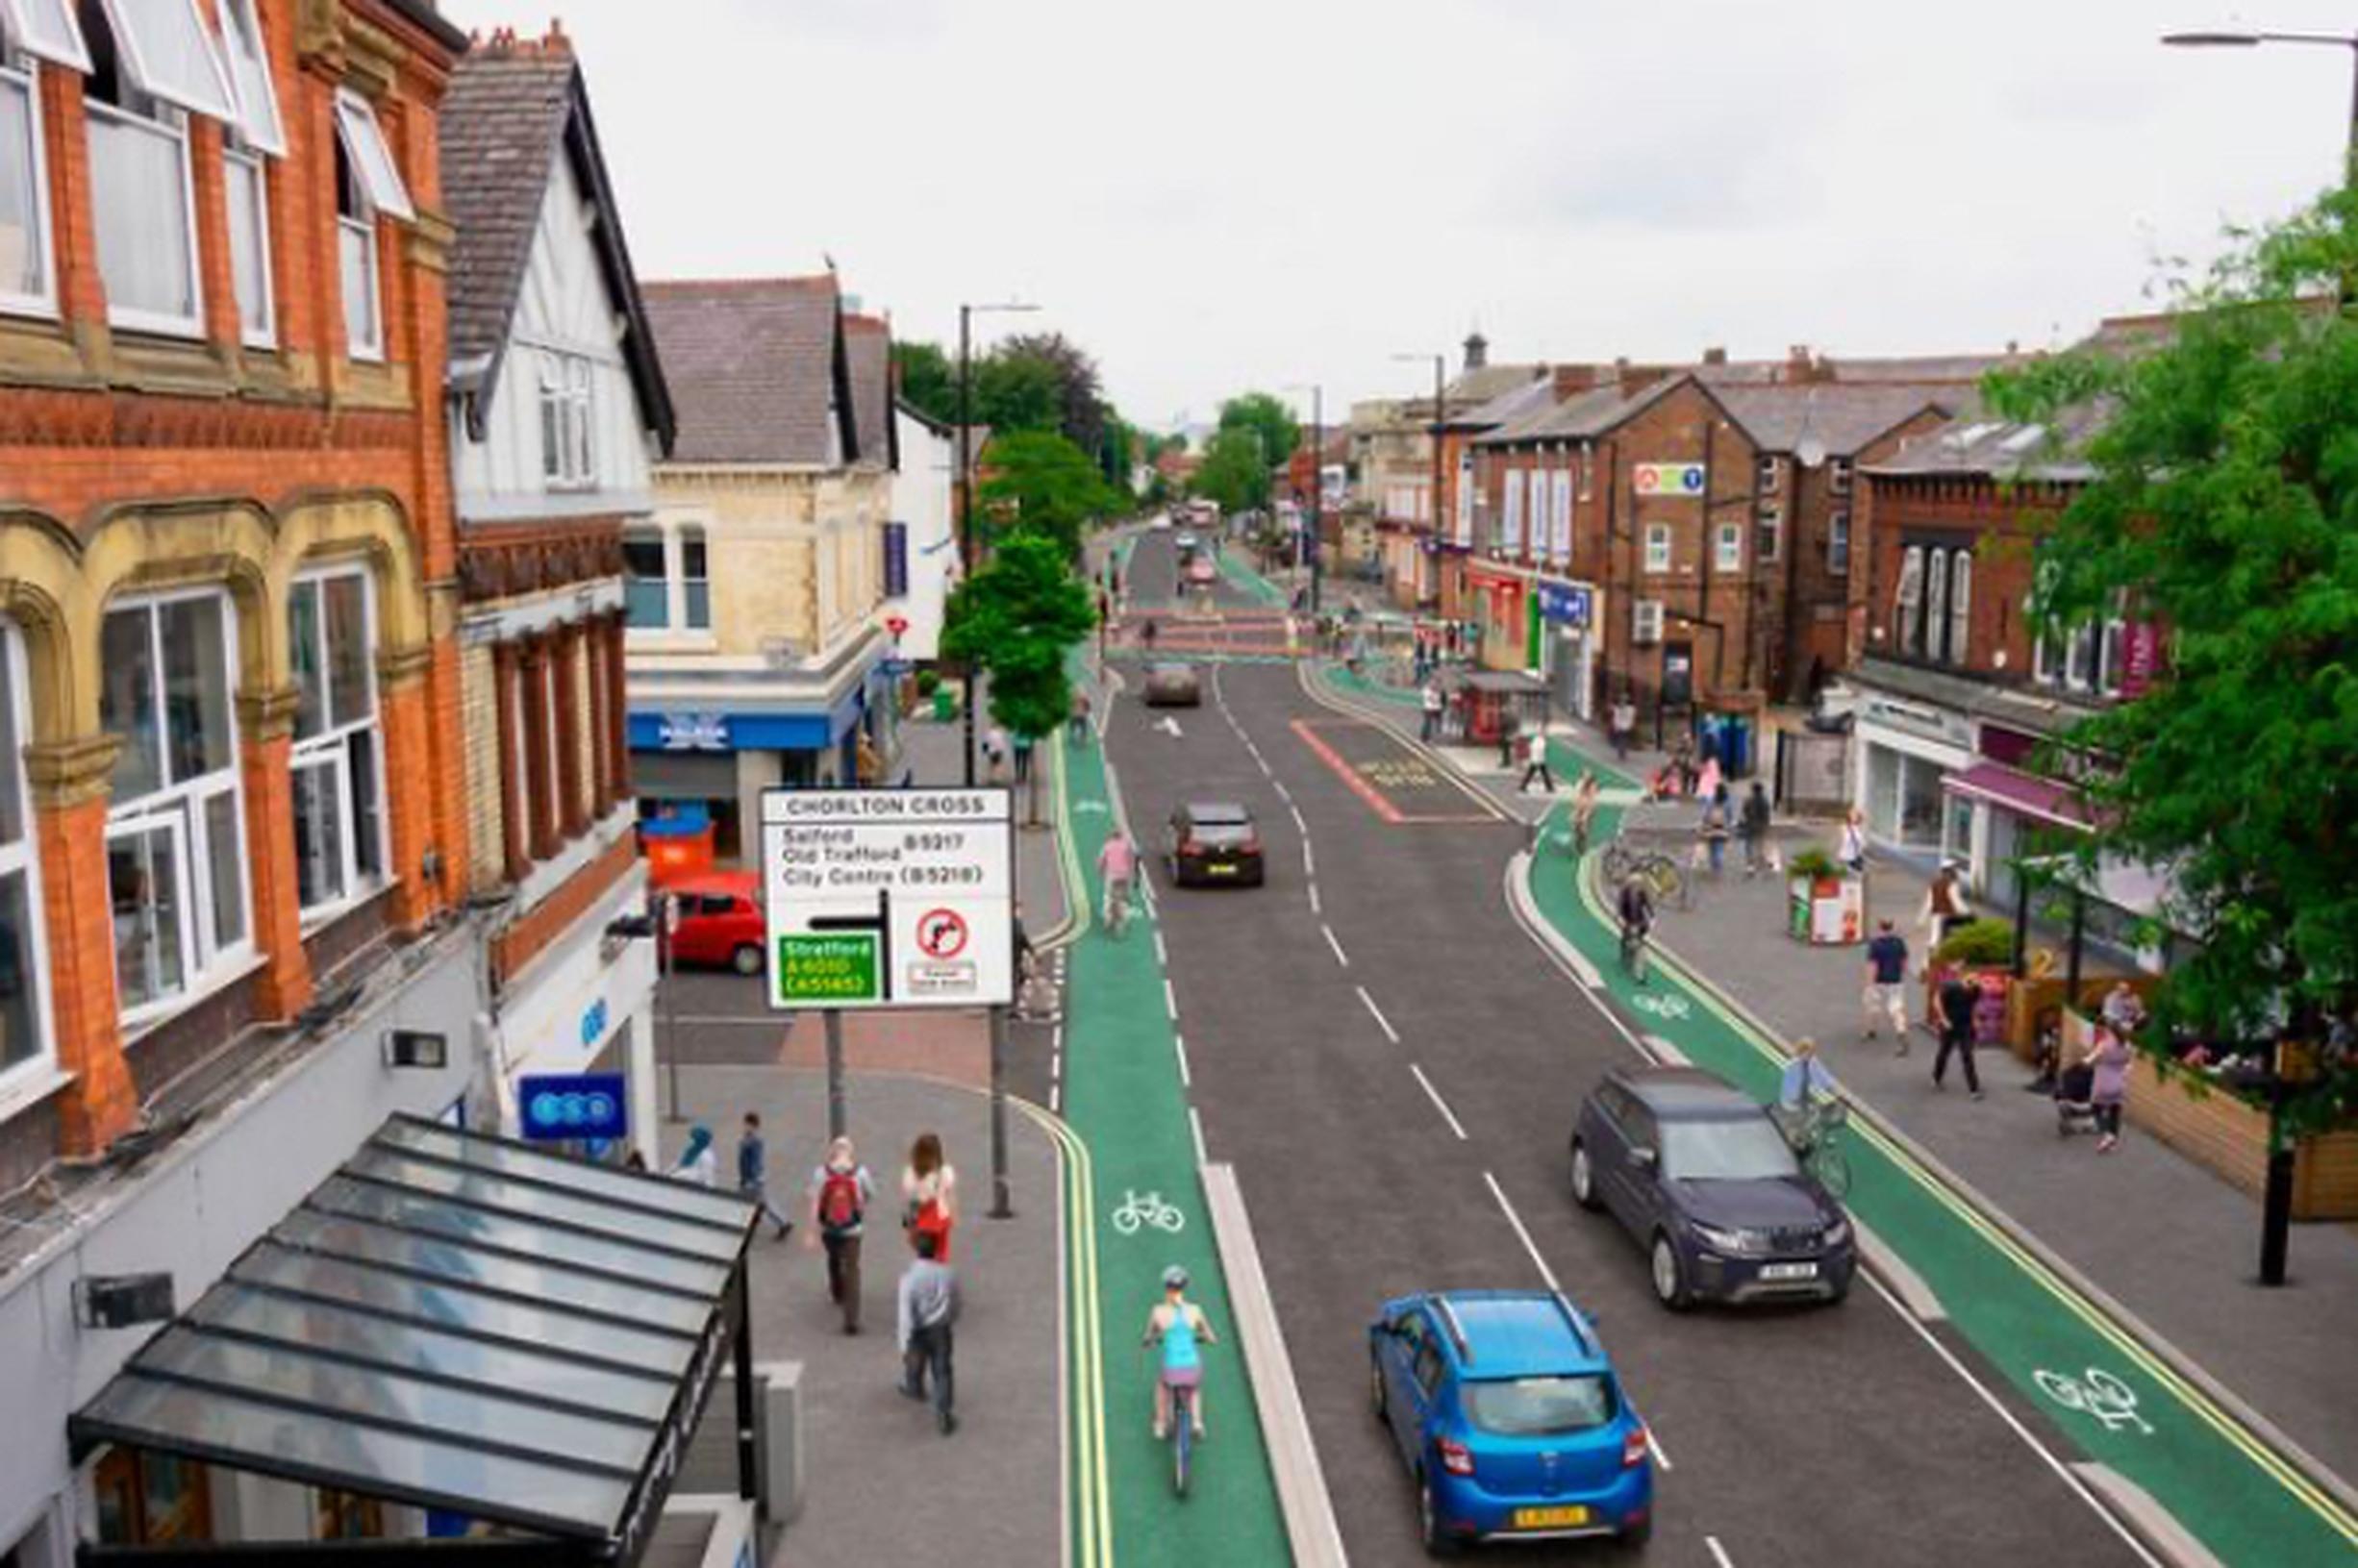 The Chorlton Cycleway is a continuous 5km cycle route that will connect Chorlton with Manchester City Centre